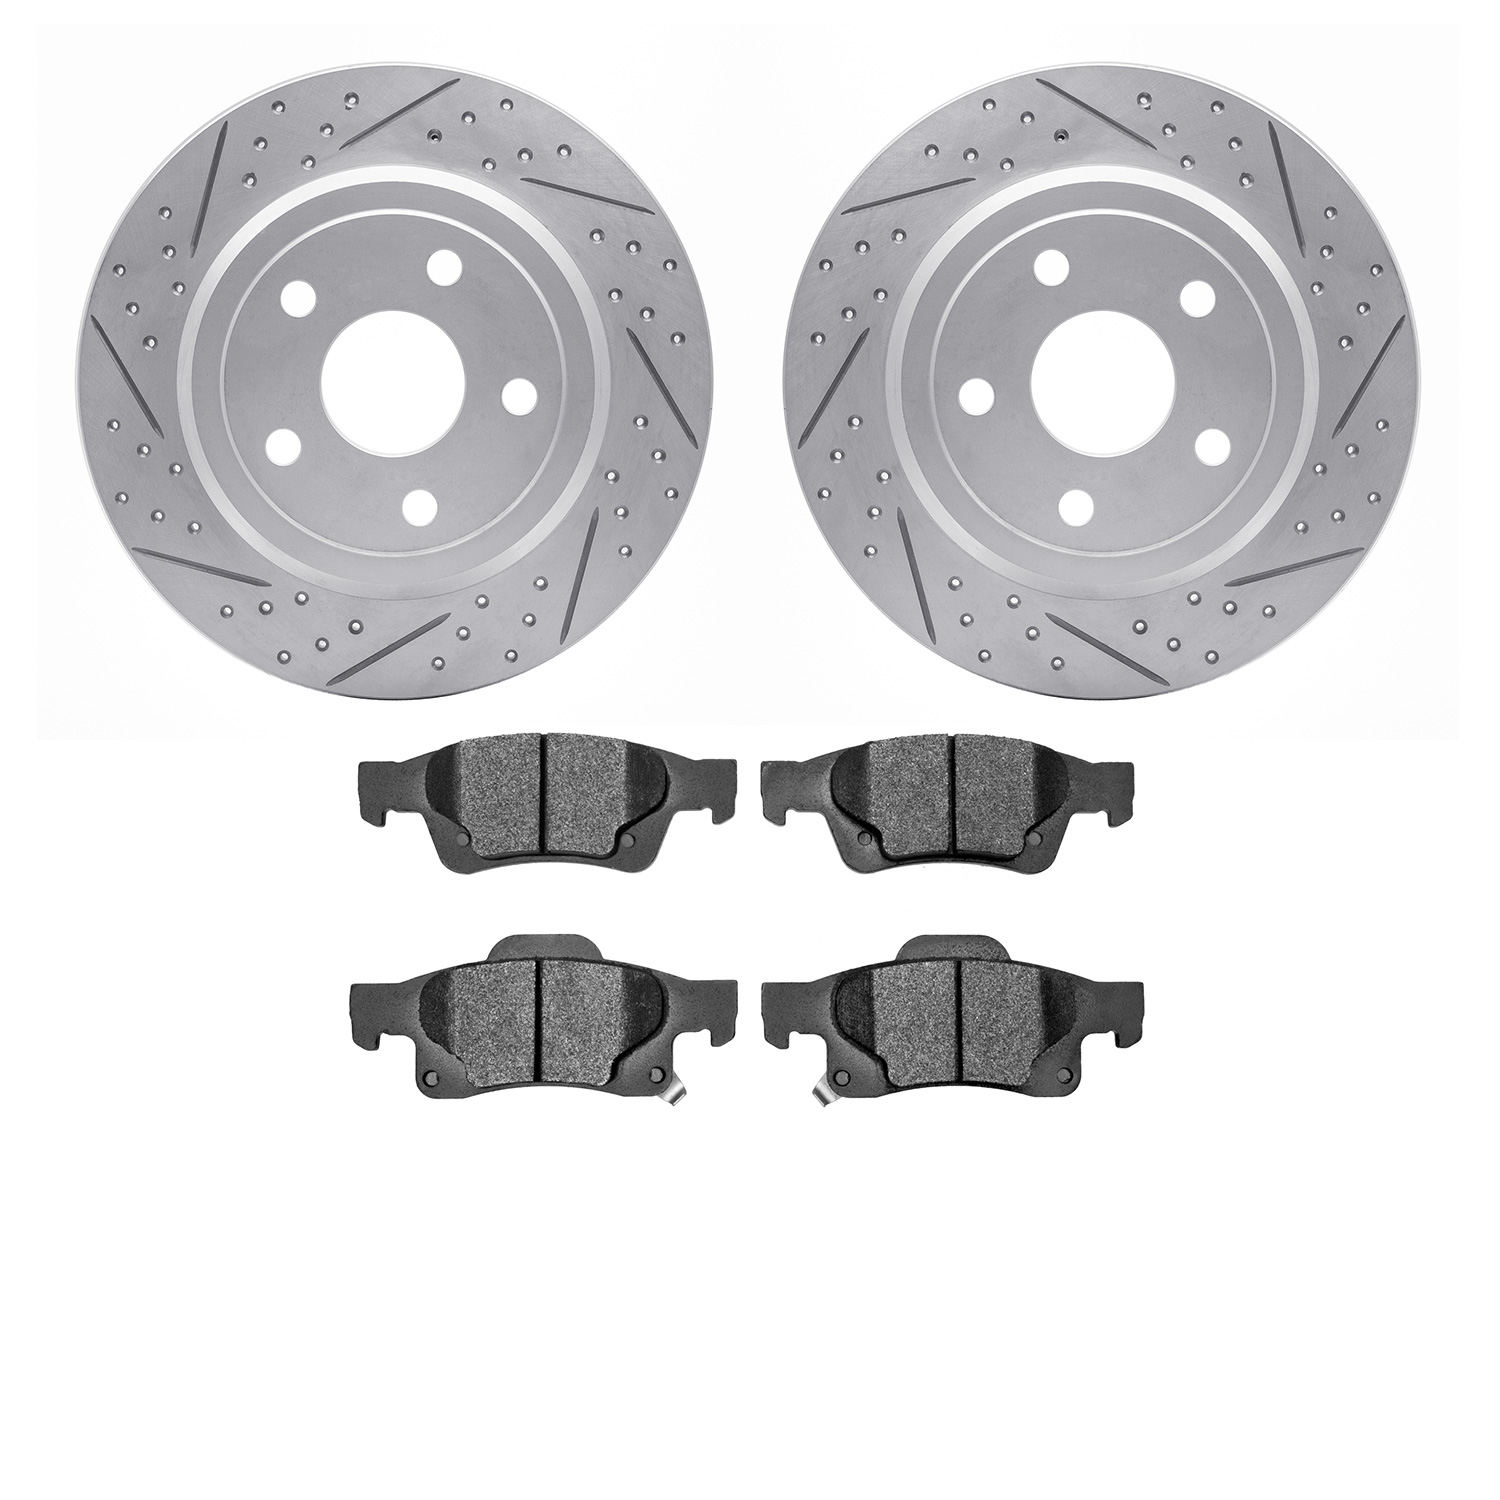 Geoperformance Drilled/Slotted Rotors w/Heavy-Duty Pads Kit, Fits